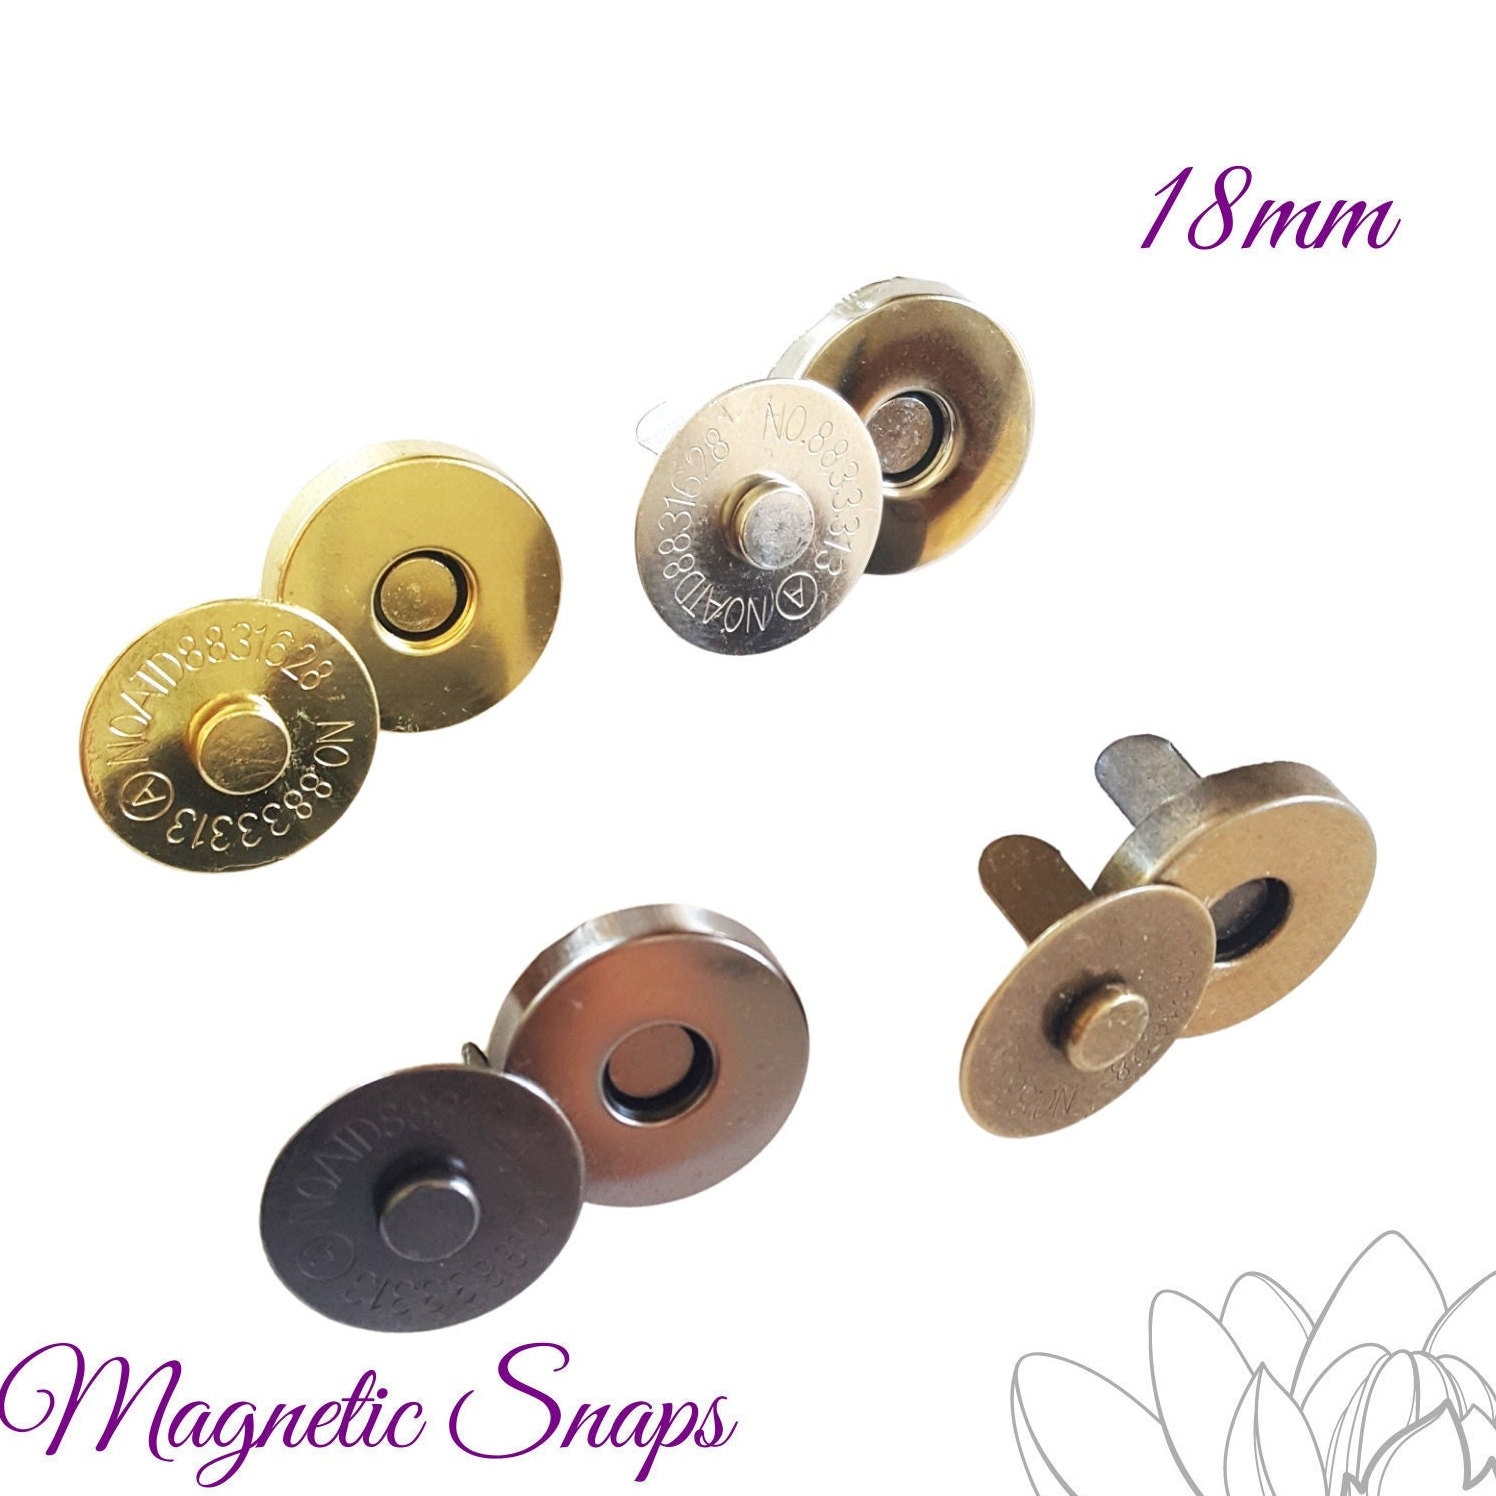 50 Sets Brass Material Utility Spring Metal Snapsheavy Duty Snaps for  Leather Metal Snap Fasteners Tool Leather Snaps Leather Fasteners 